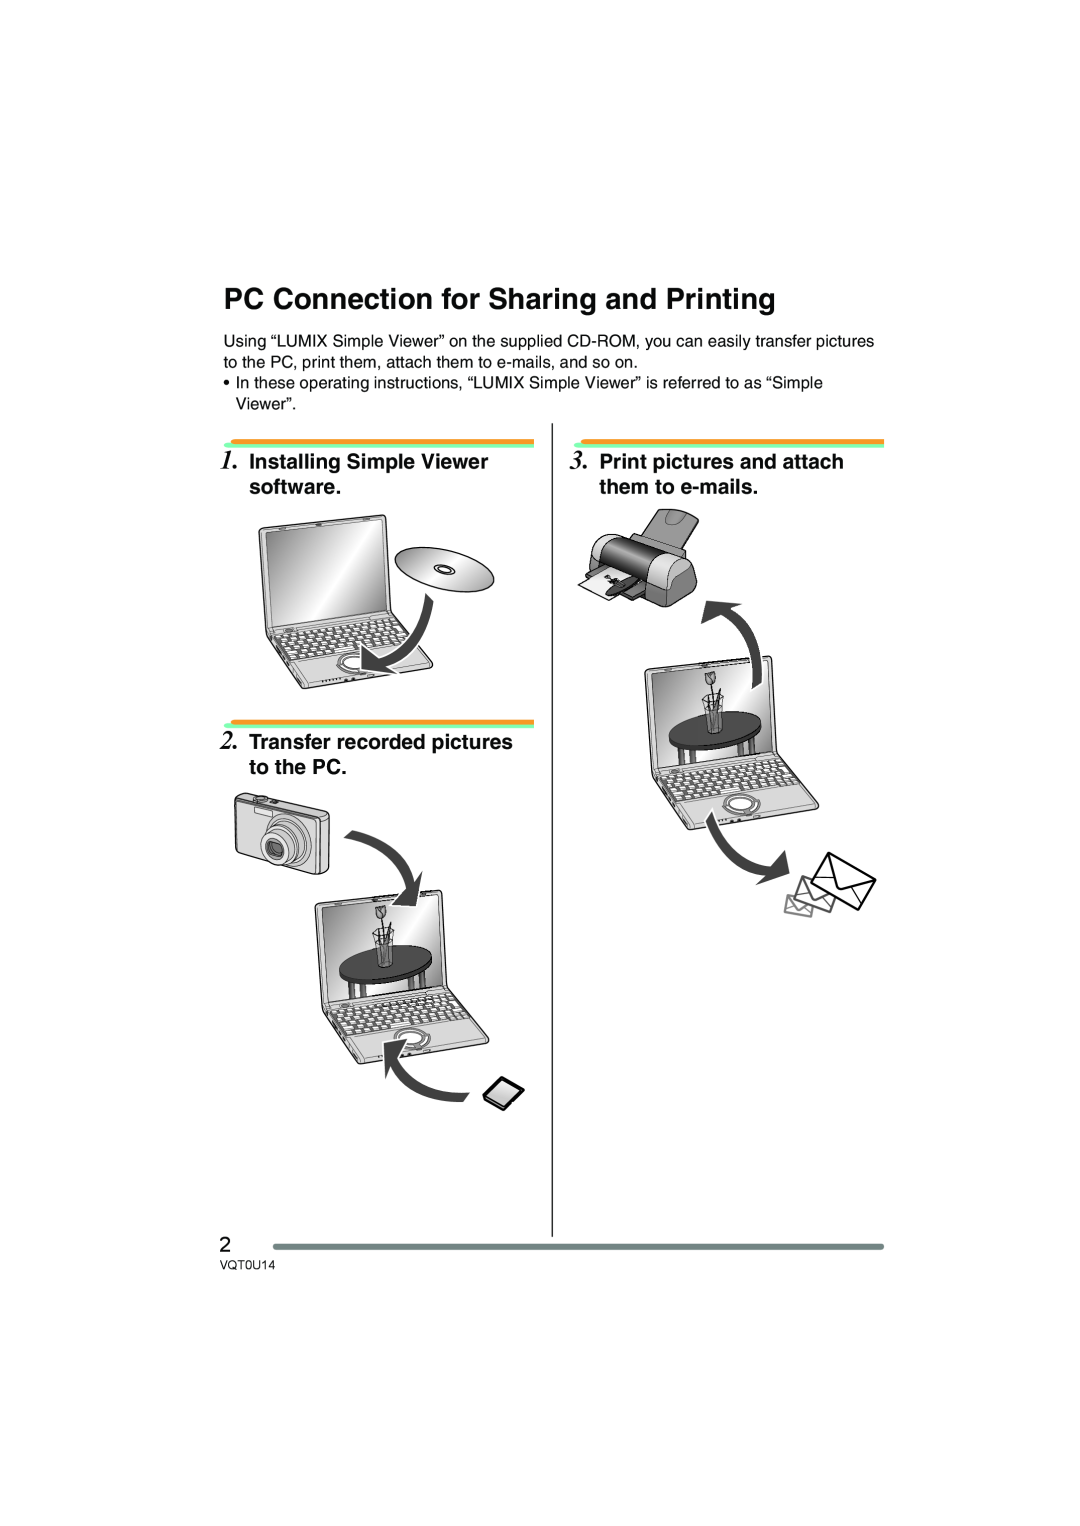 Panasonic VQT0U14 operating instructions PC Connection for Sharing and Printing, Installing Simple Viewer software 